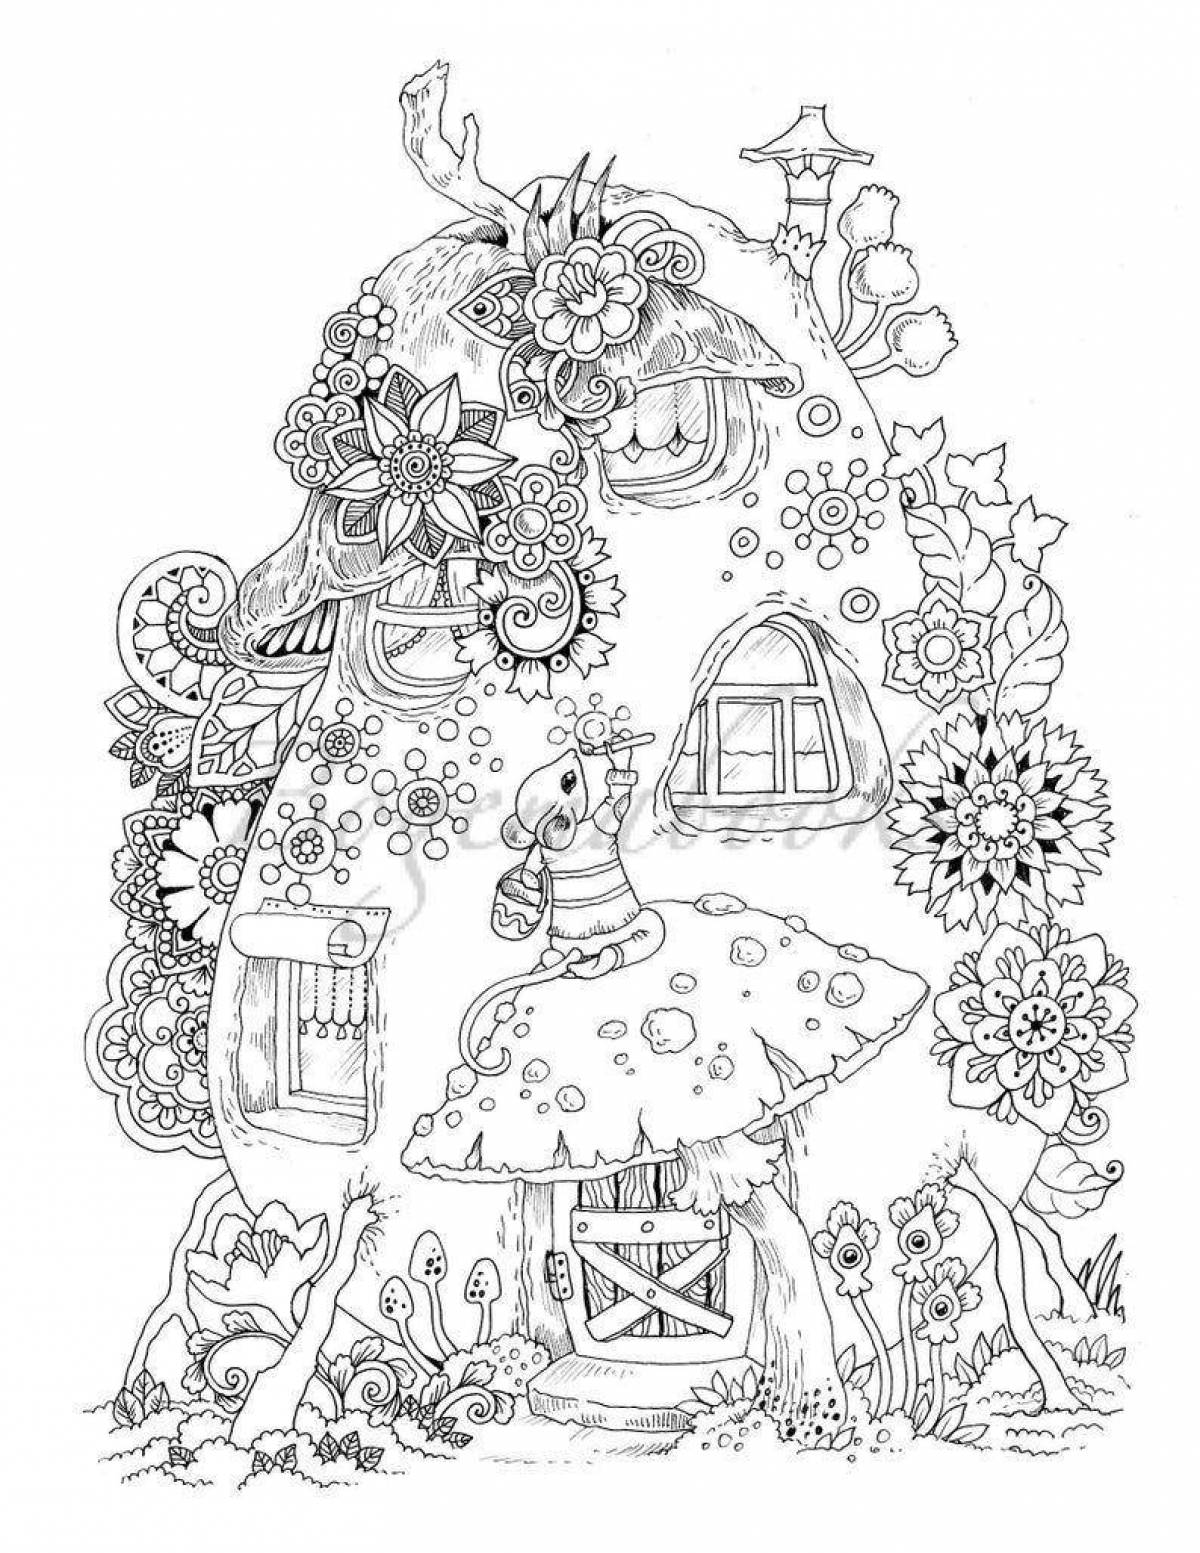 Coloring book amazing fairytale house